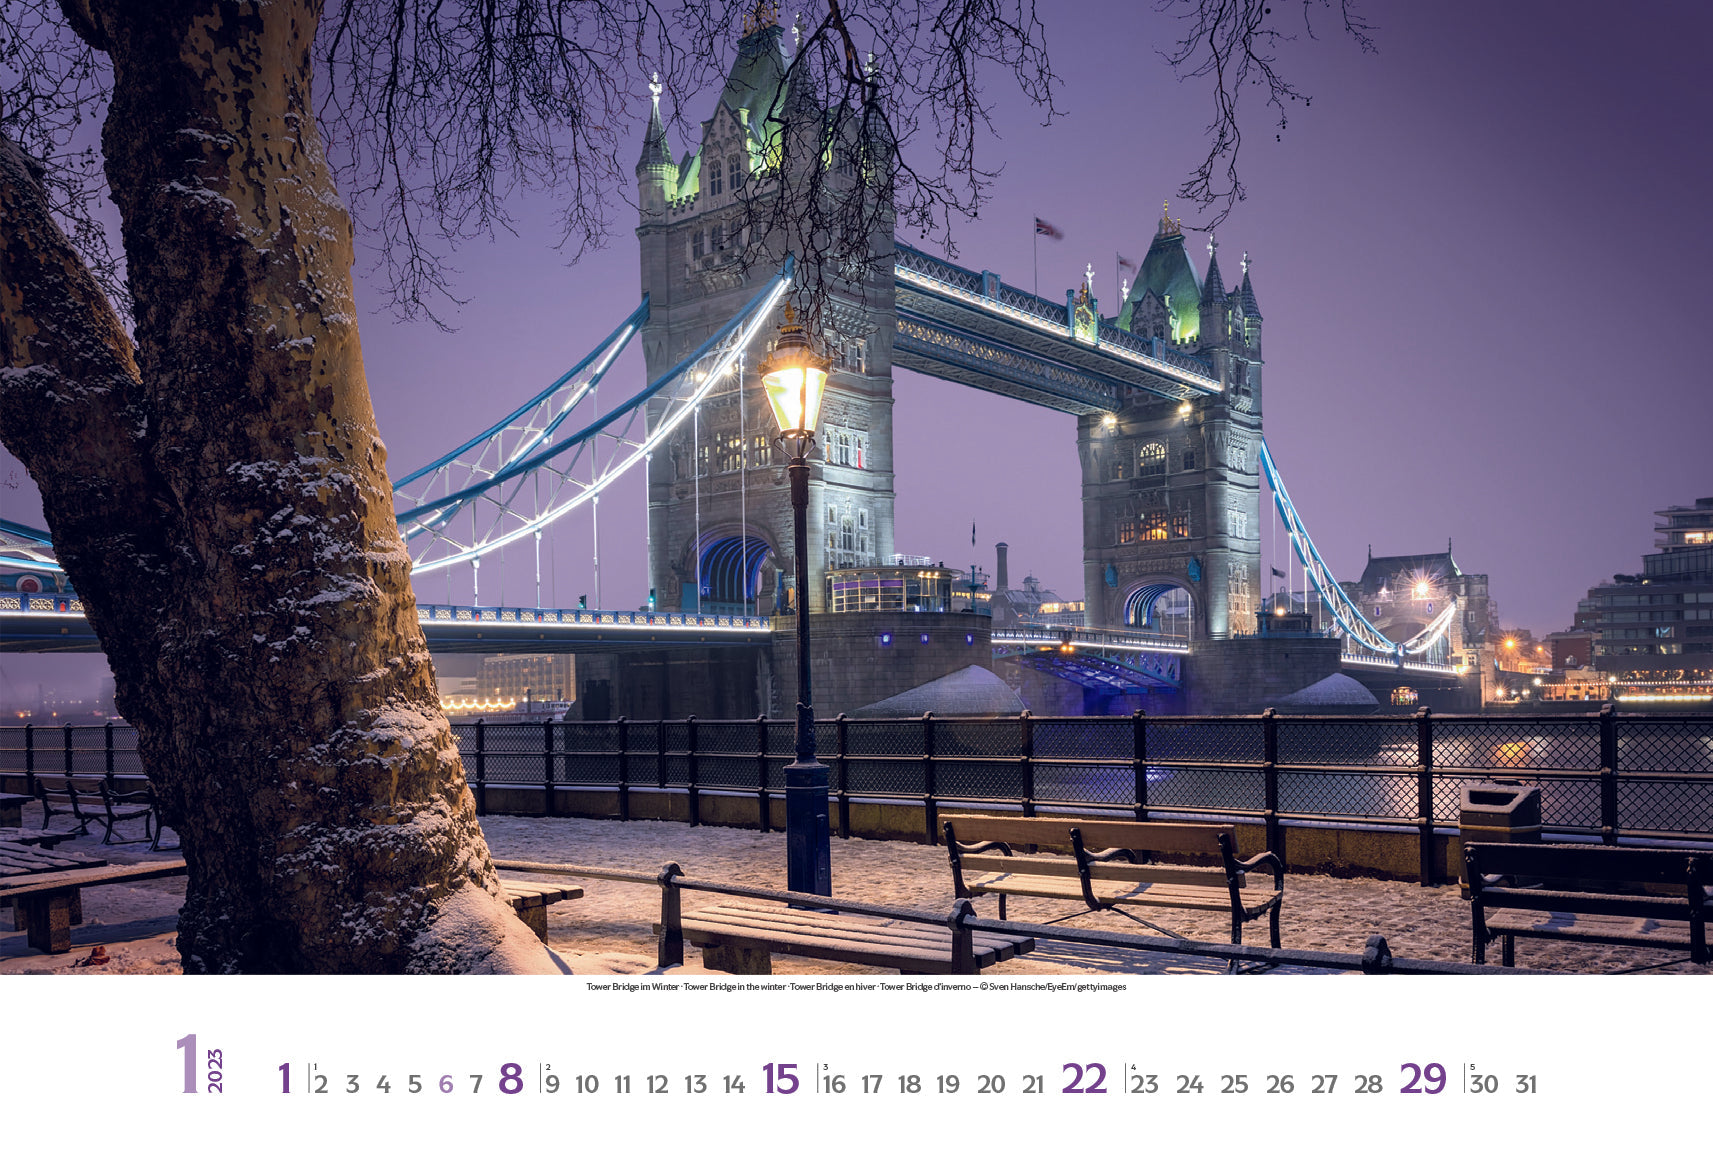 2023 London (Large) - Deluxe Wall Poster Calendar